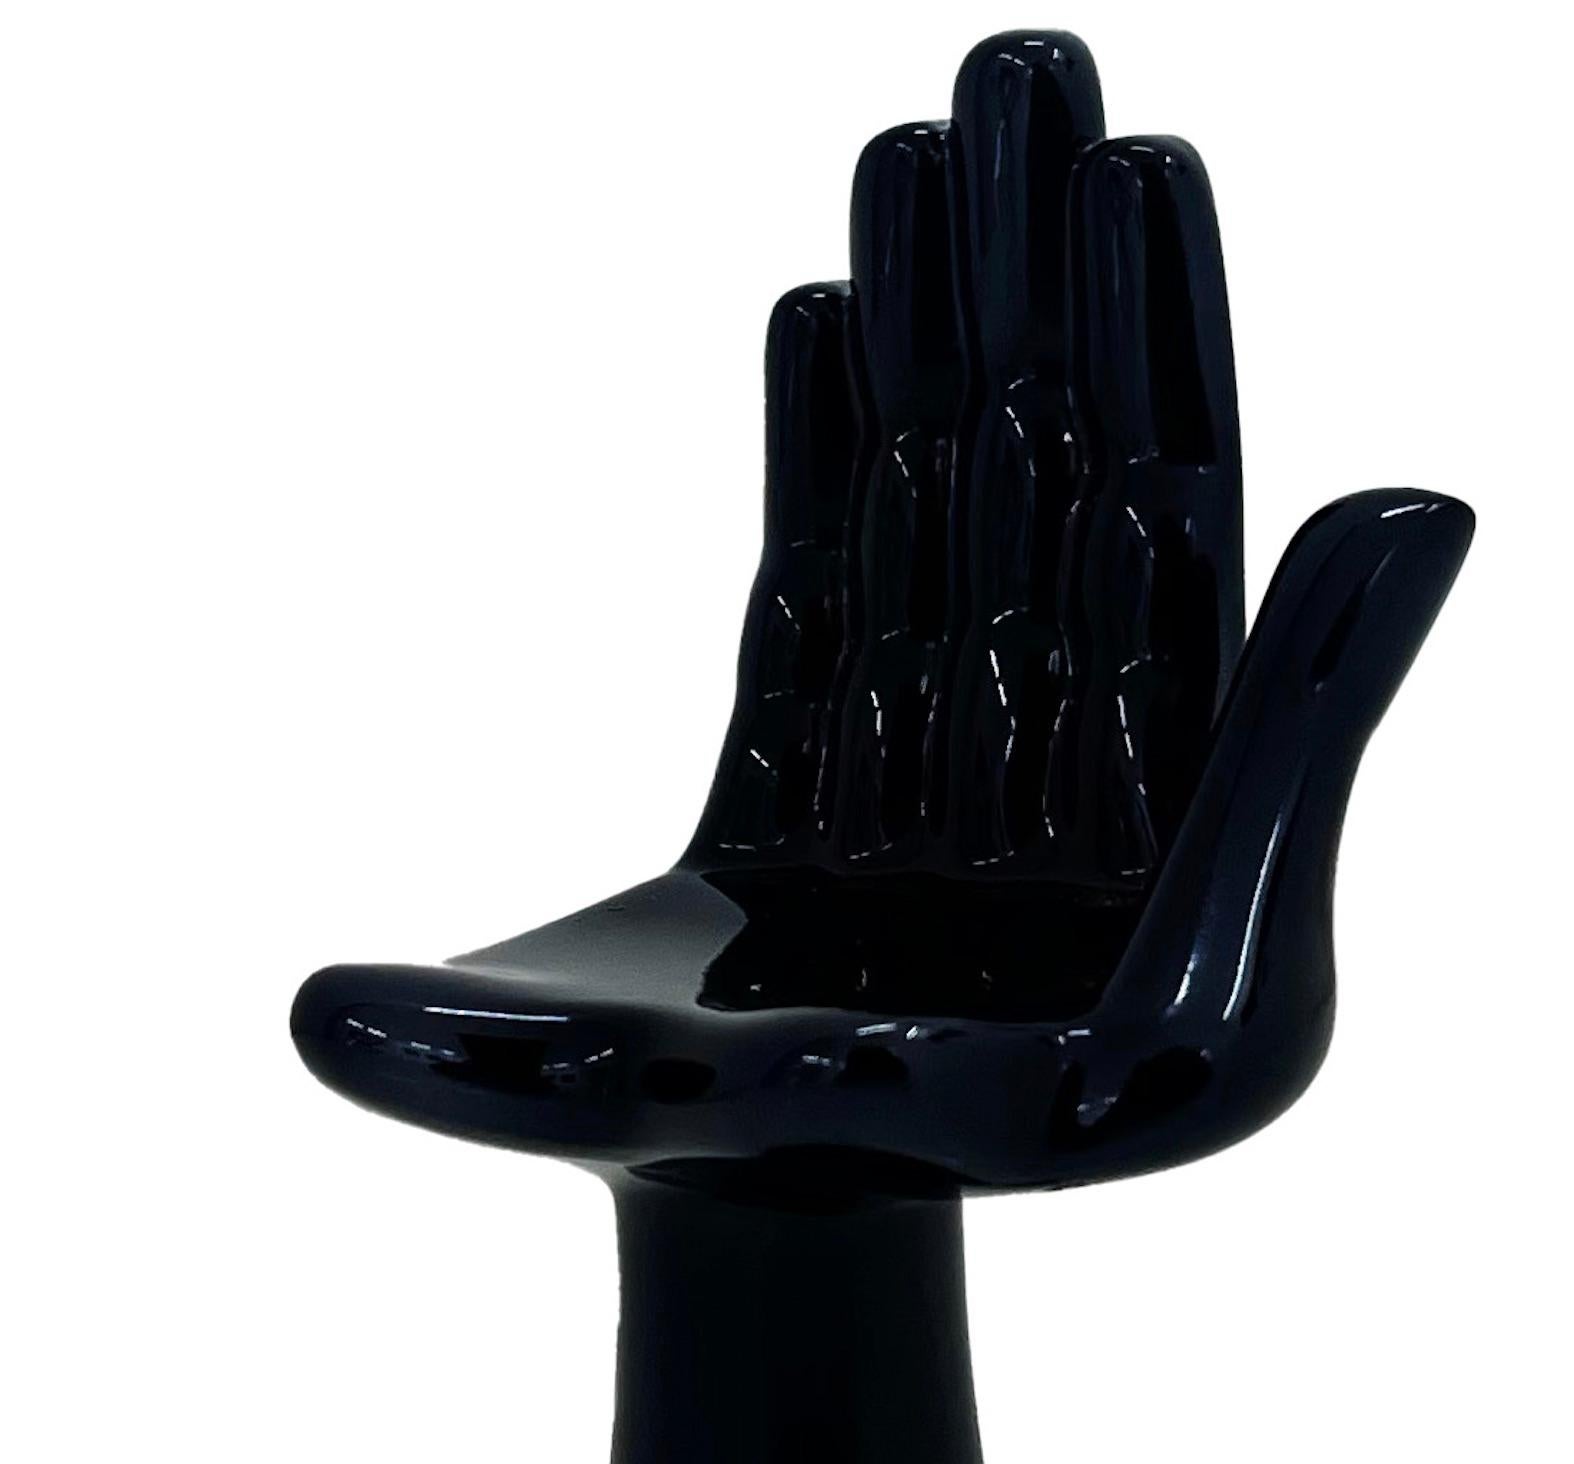 hand shaped chair uk